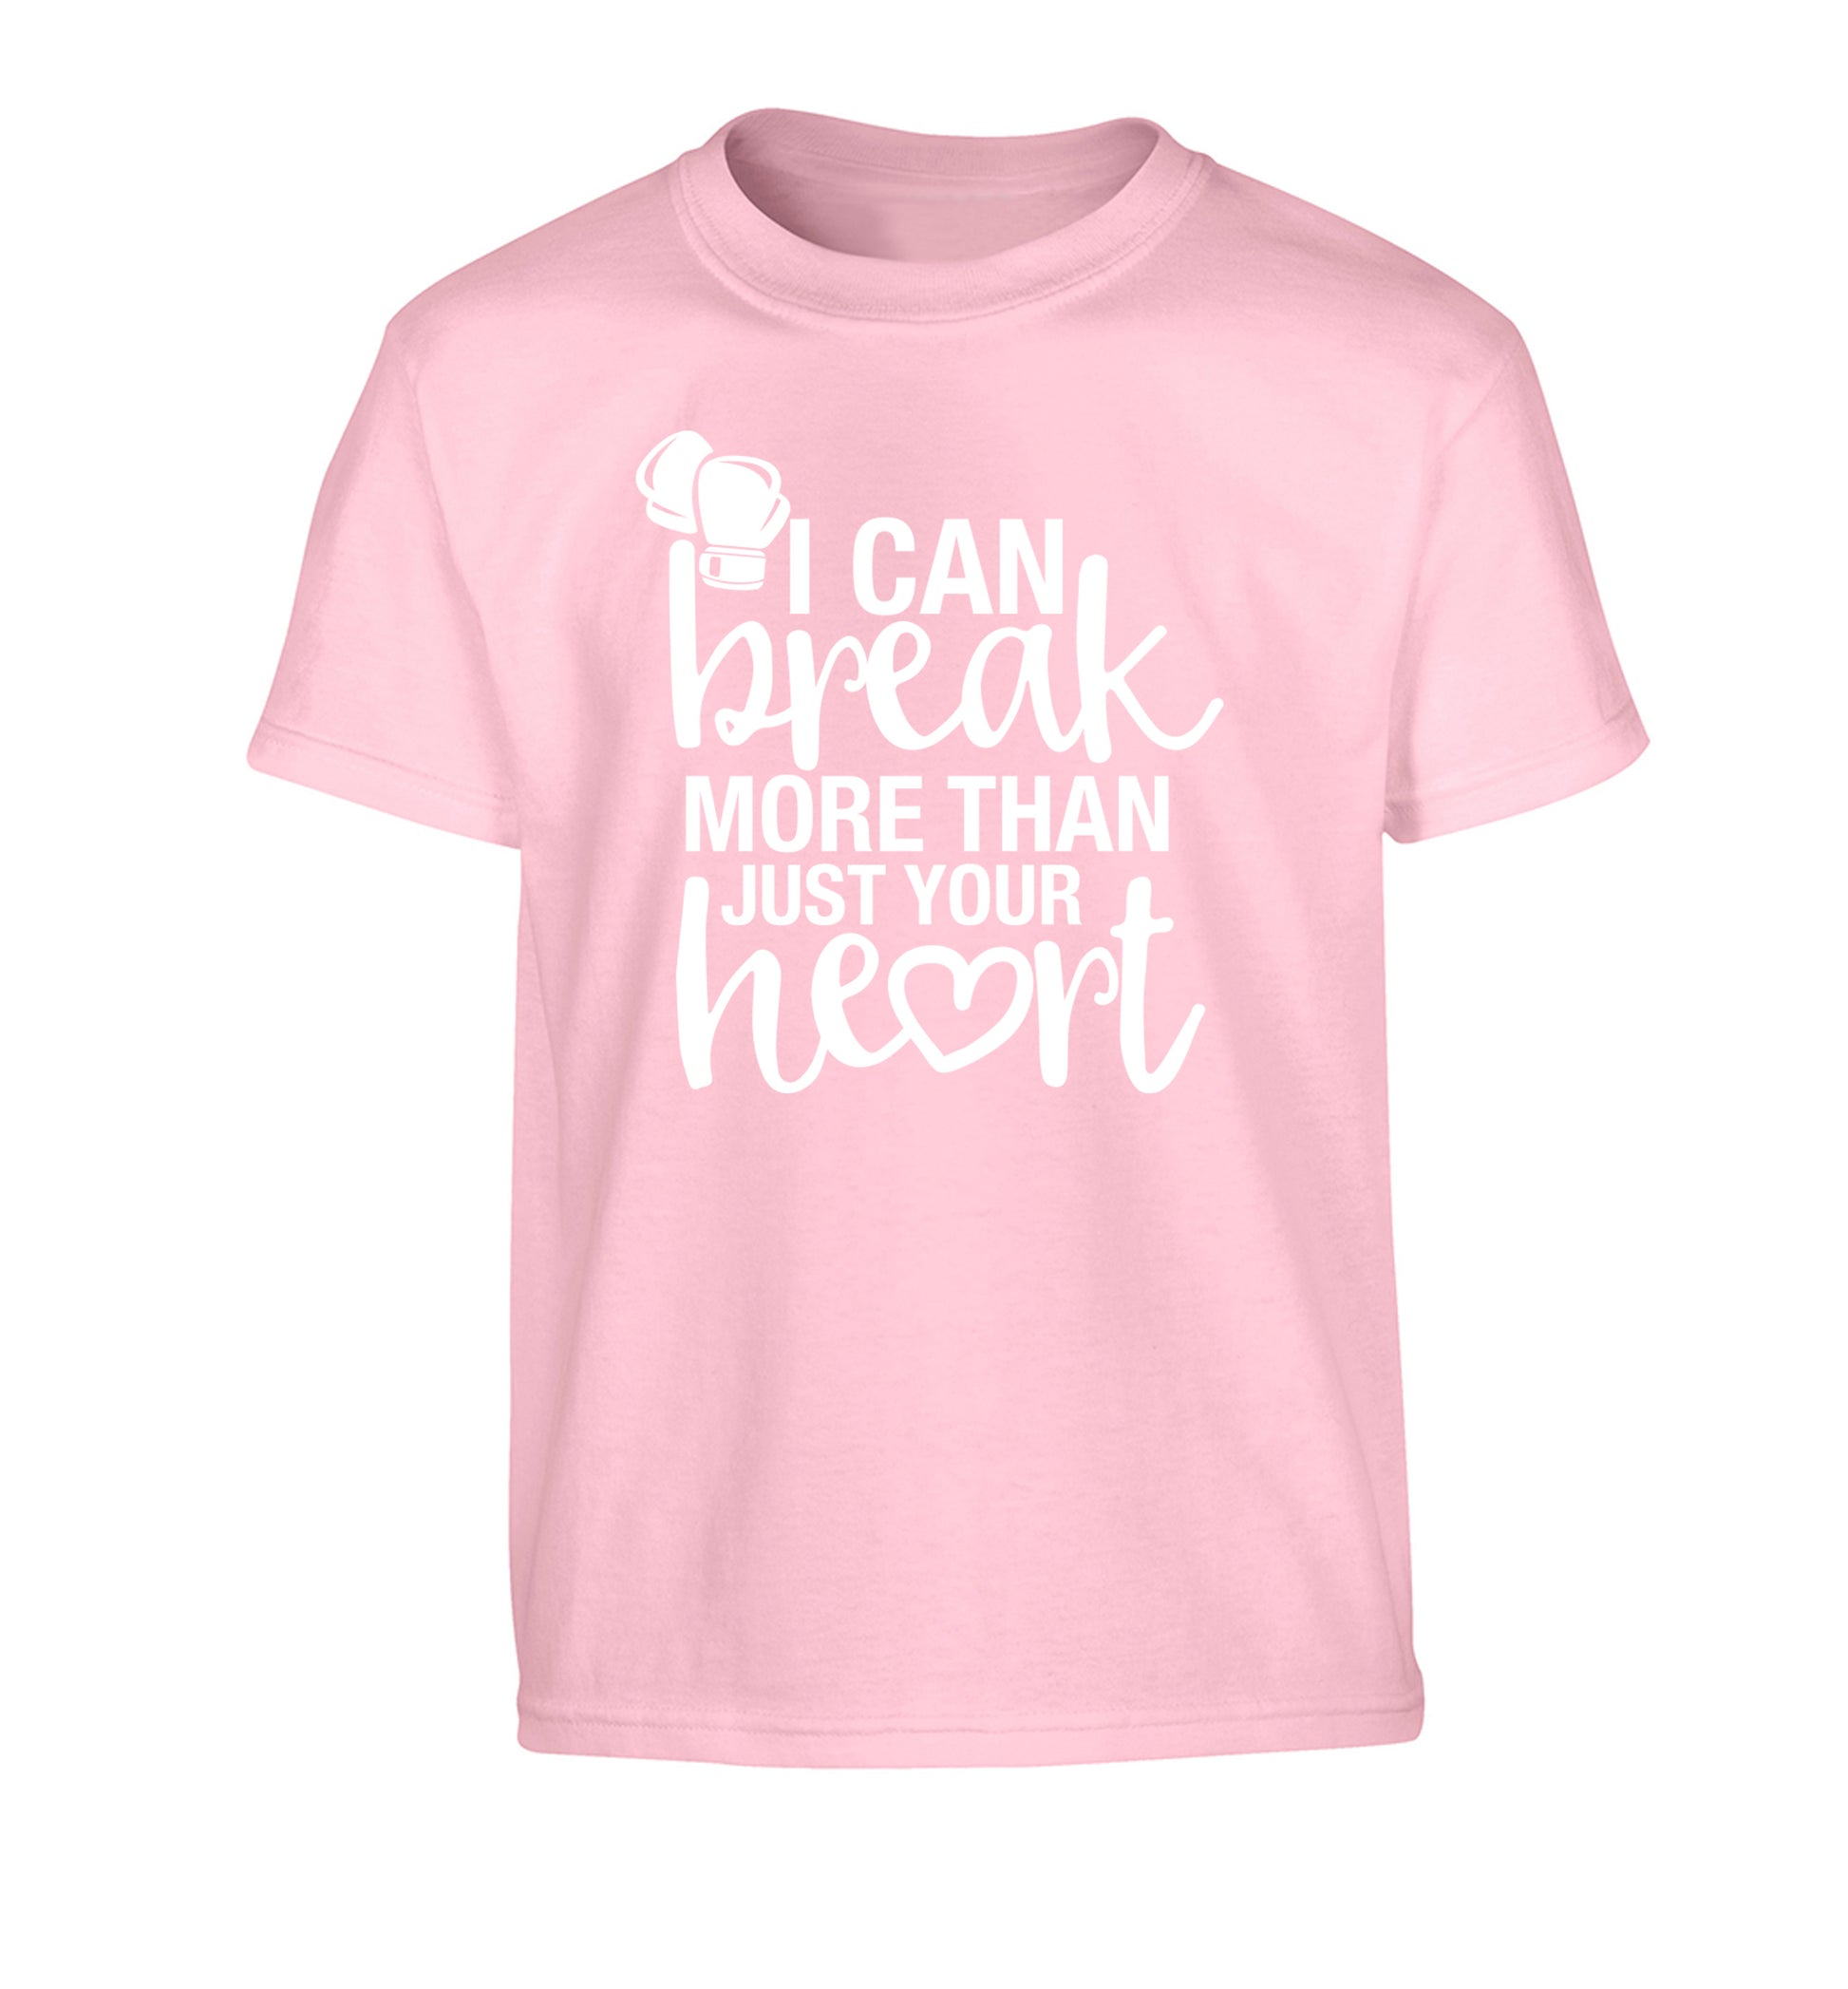 I can break more than just your heart Children's light pink Tshirt 12-13 Years